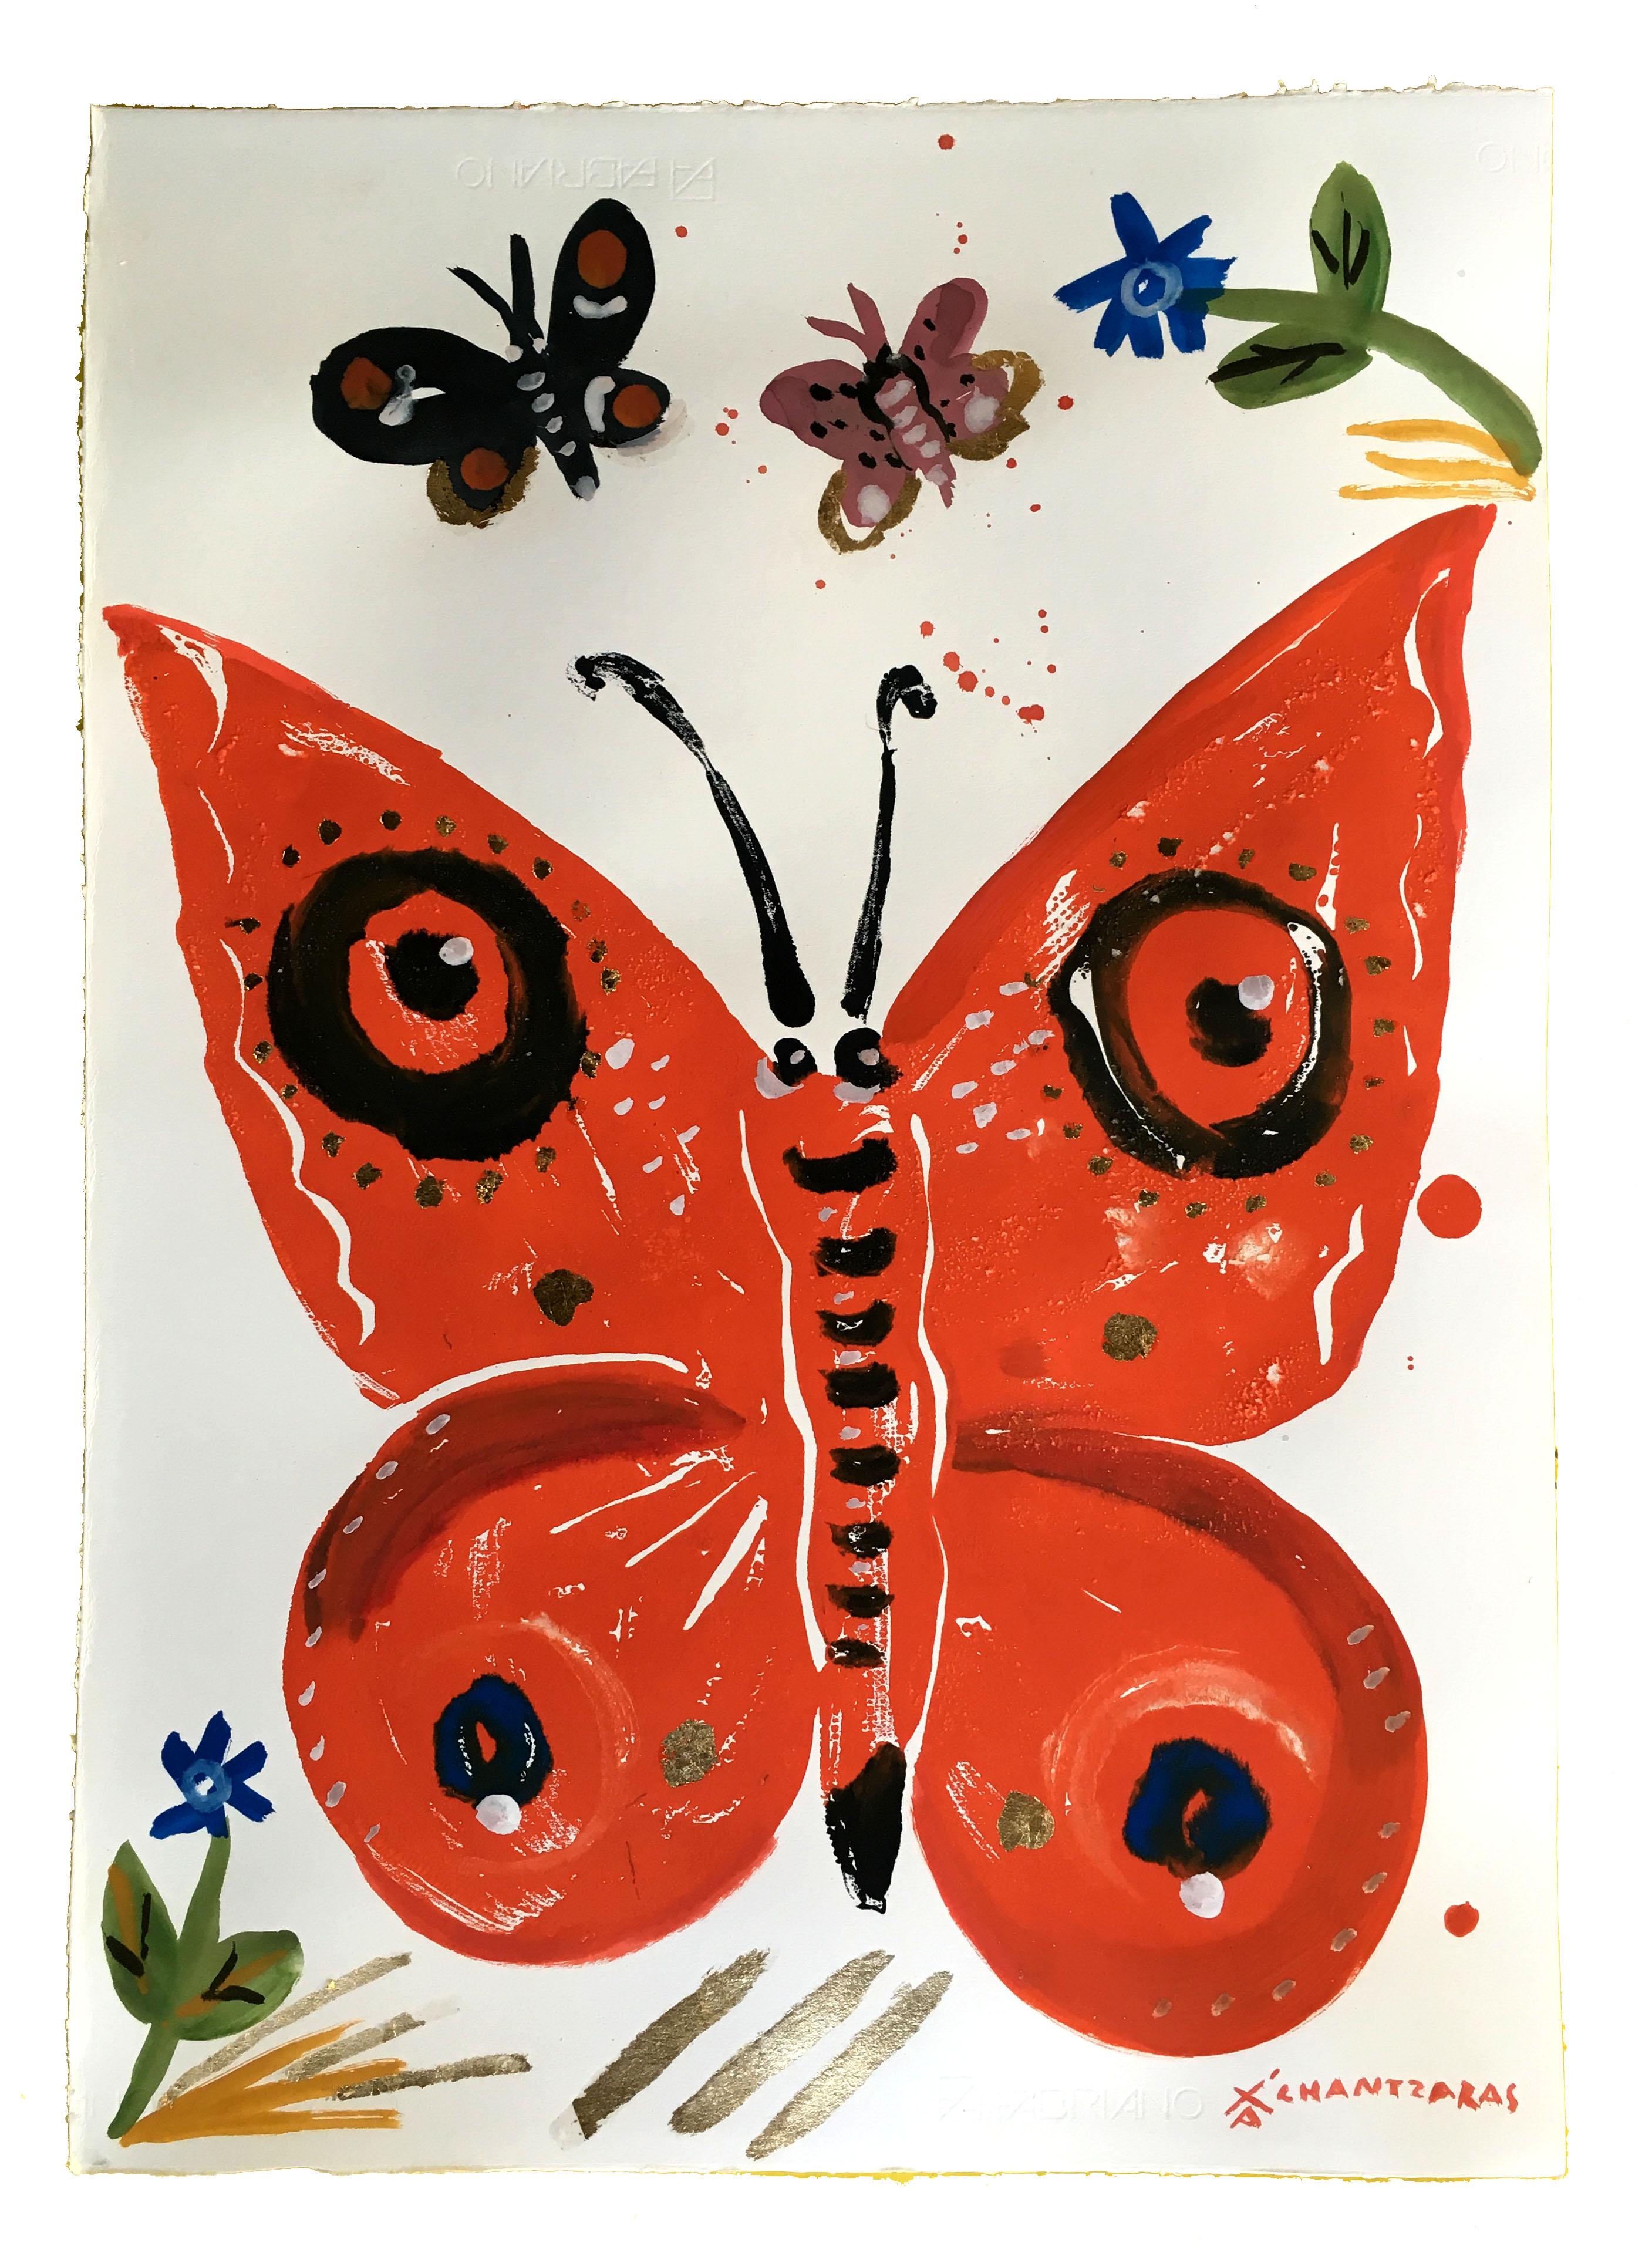 Psychi 9 - The Soul, oil paint on paper, orange contemporary whimsical butterfly